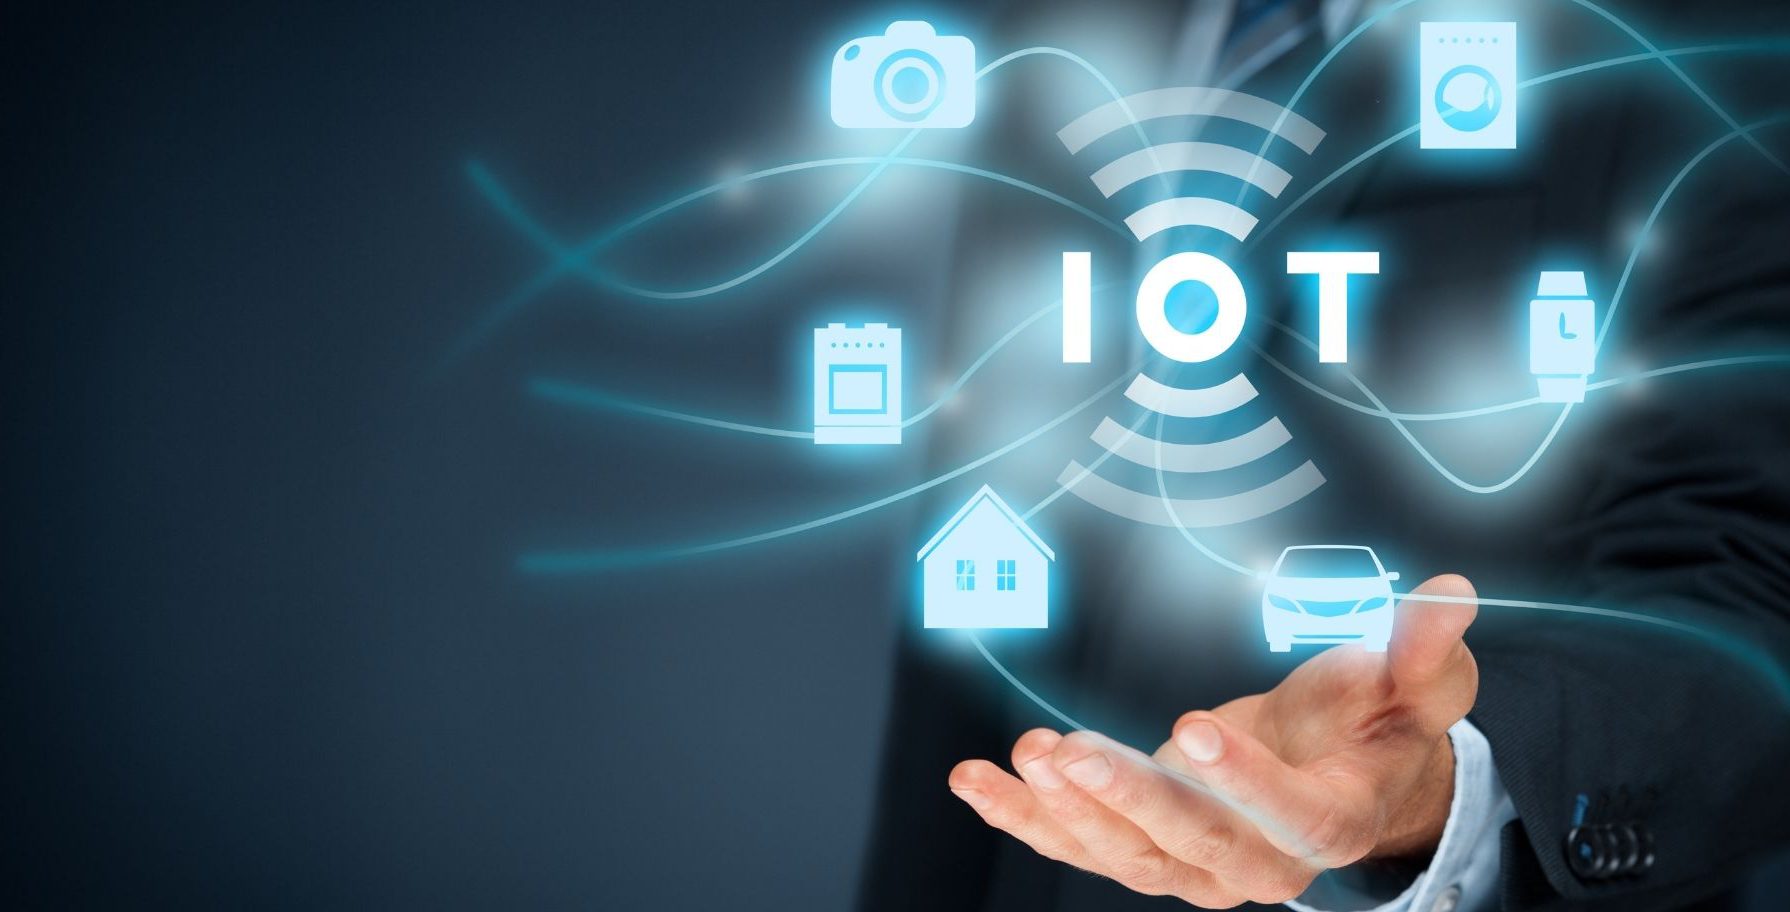 Global Internet of Things (IoT) Node and Gateway Market Overview And Prospects